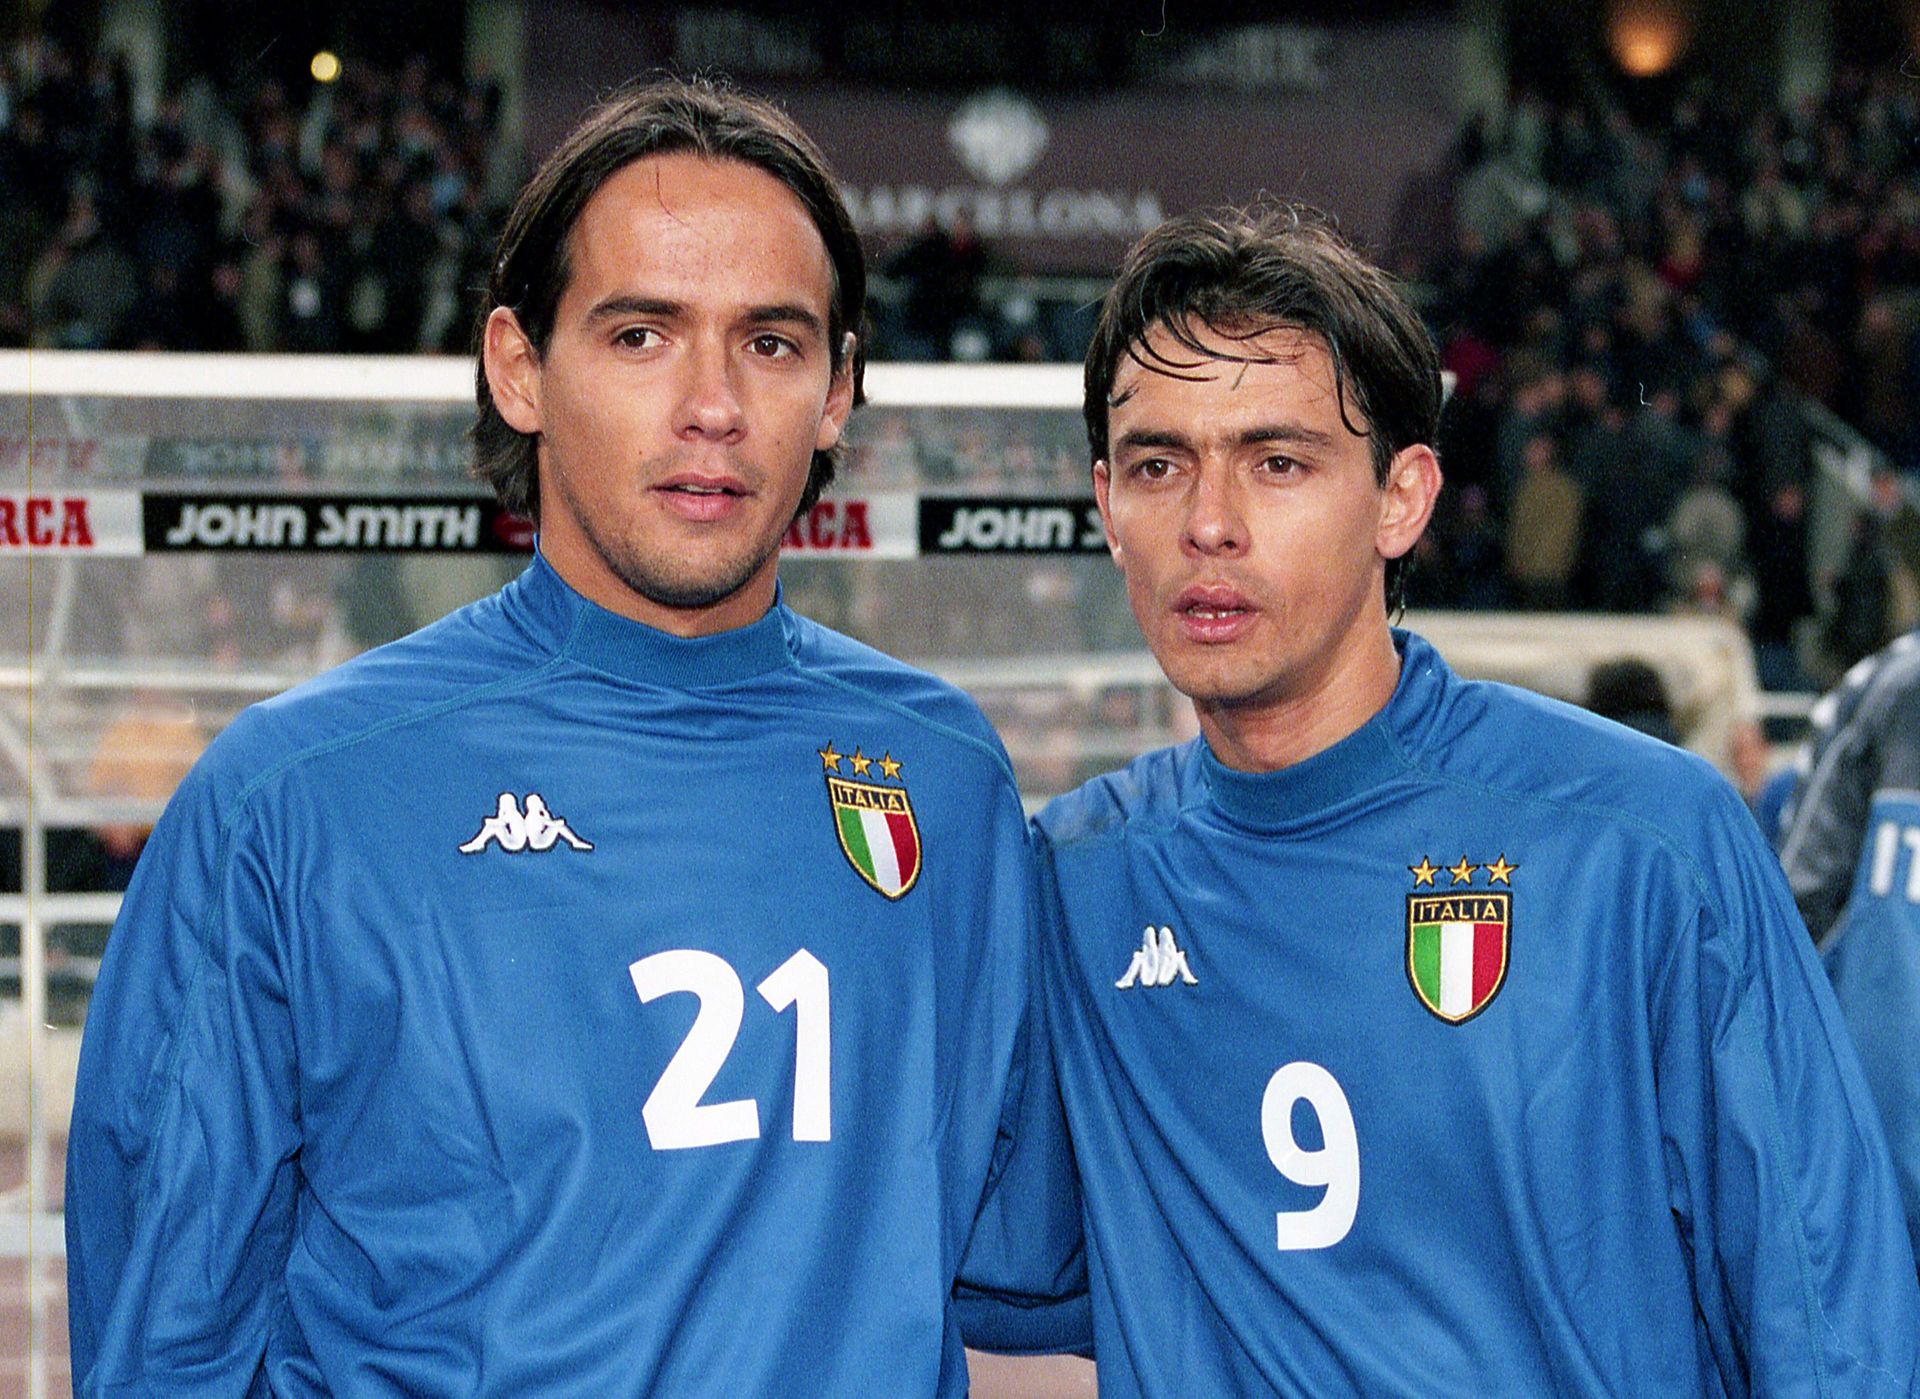 <p>                     Filippo Inzaghi is one of Italy's greatest-ever strikers and the former Juventus and AC Milan forward was a World Cup winner with the Azzurri in 2006. In total, he hit 25 goals in 57 appearances in a 10-year international career.                   </p>                                      <p>                     His younger brother Simone was not quite as successful, but enjoyed a solid career which included a long spell at Lazio and three caps for Italy between 2000 and 2003.                   </p>